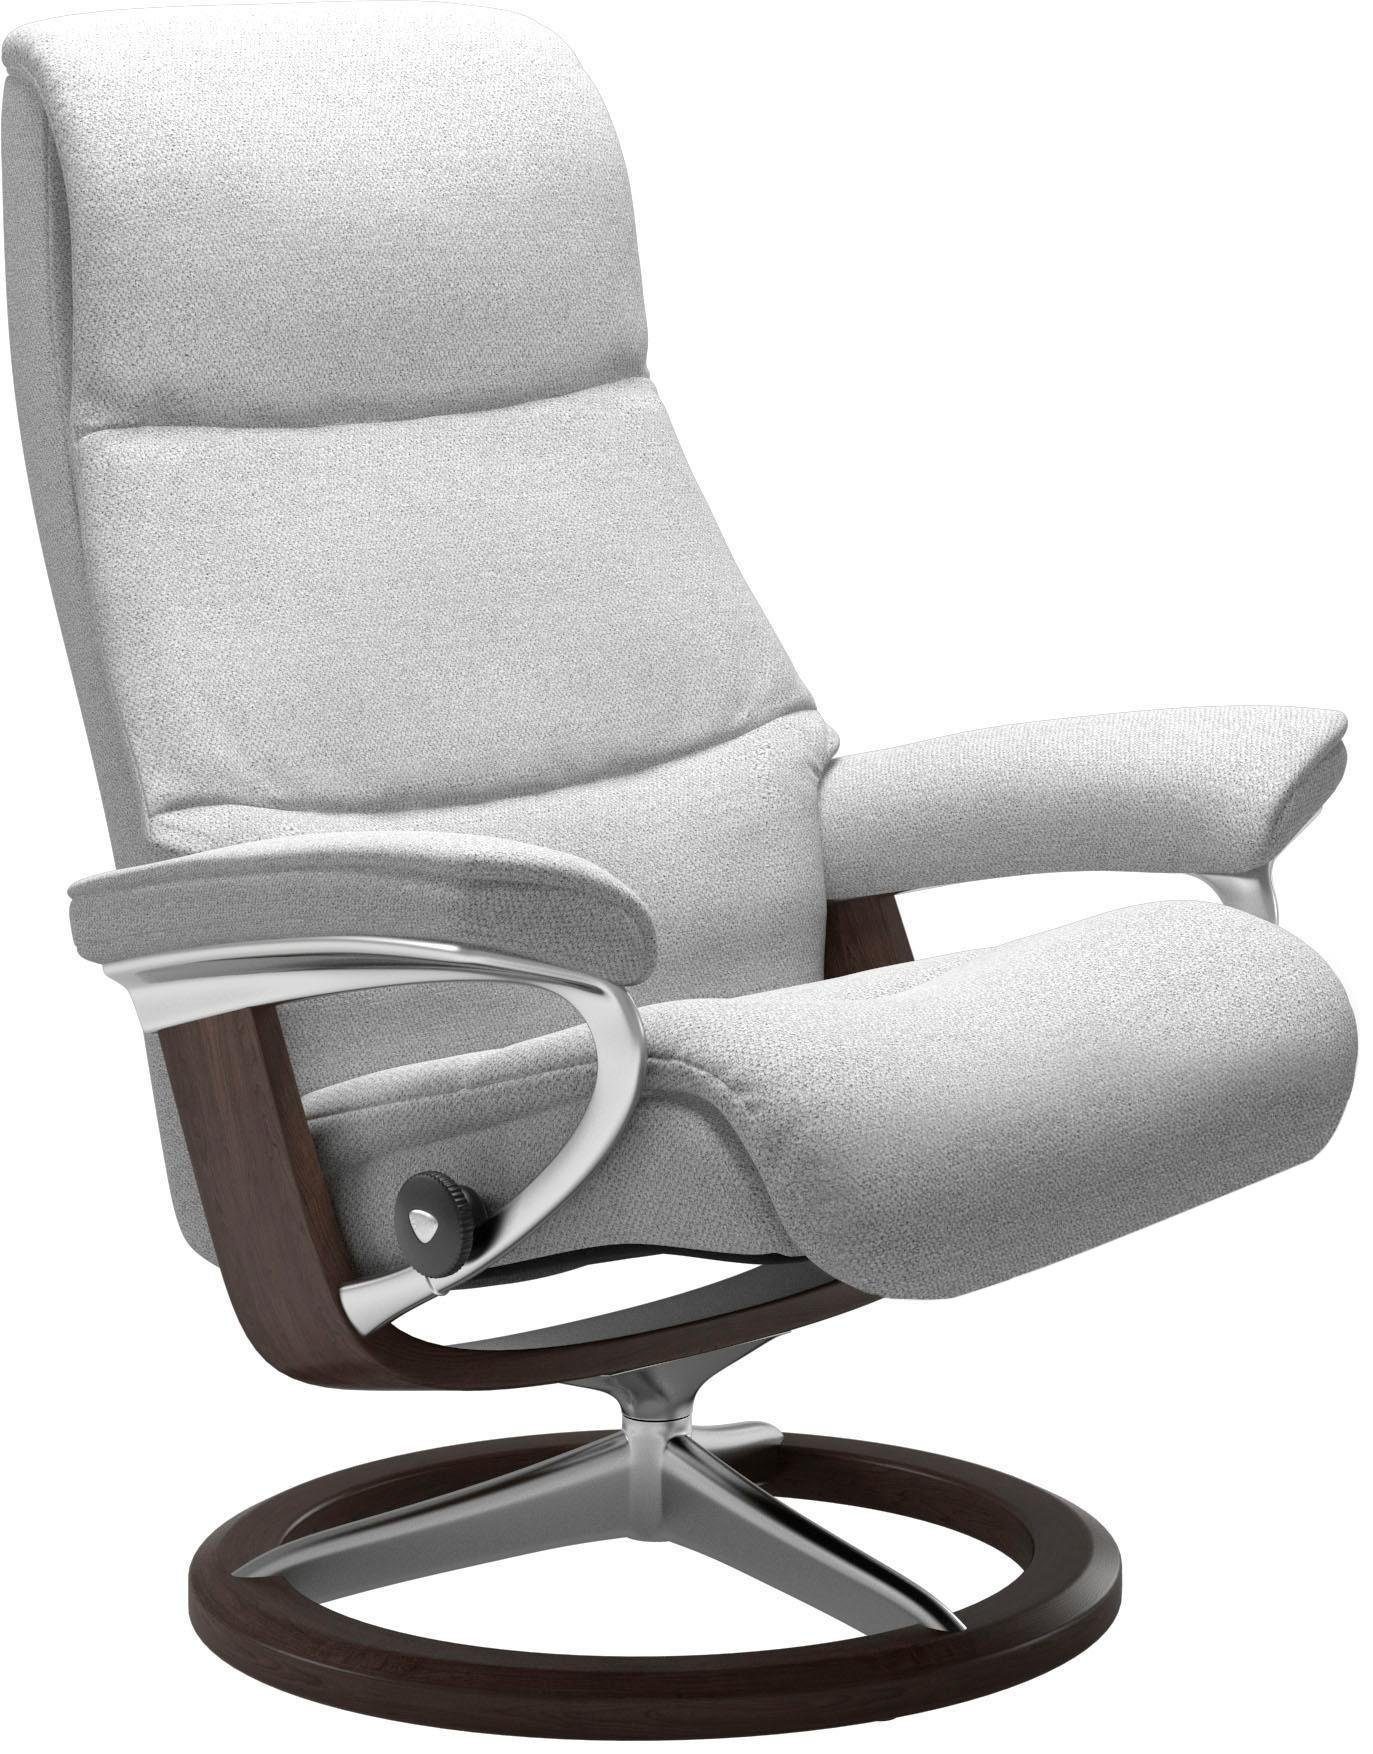 Stressless® Base, mit Wenge Relaxsessel Signature View, Größe L,Gestell